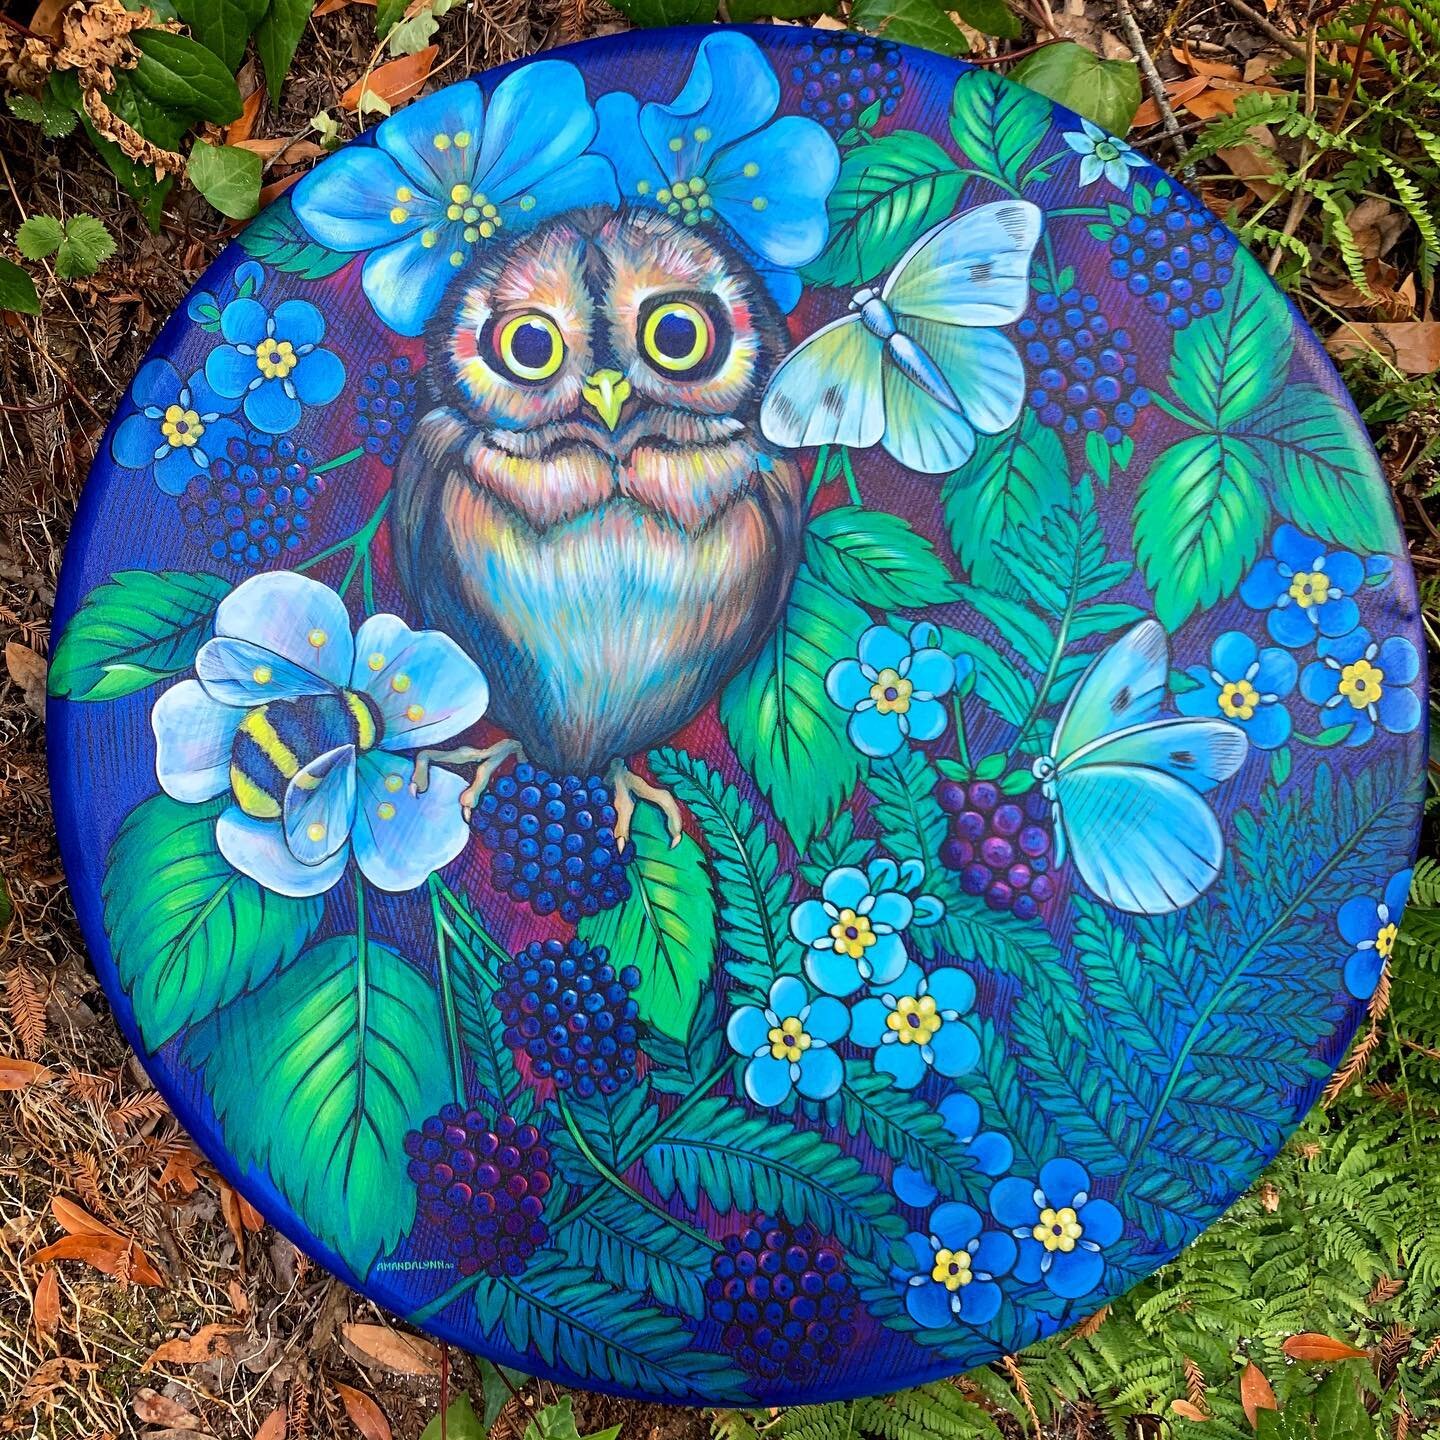 Inspired by my circle of friends in human and nature form. #FullCircle This piece is part of the collection that will be exhibited @moderneden for my solo show coming in December 2020 #Amandalynn 🦉💙